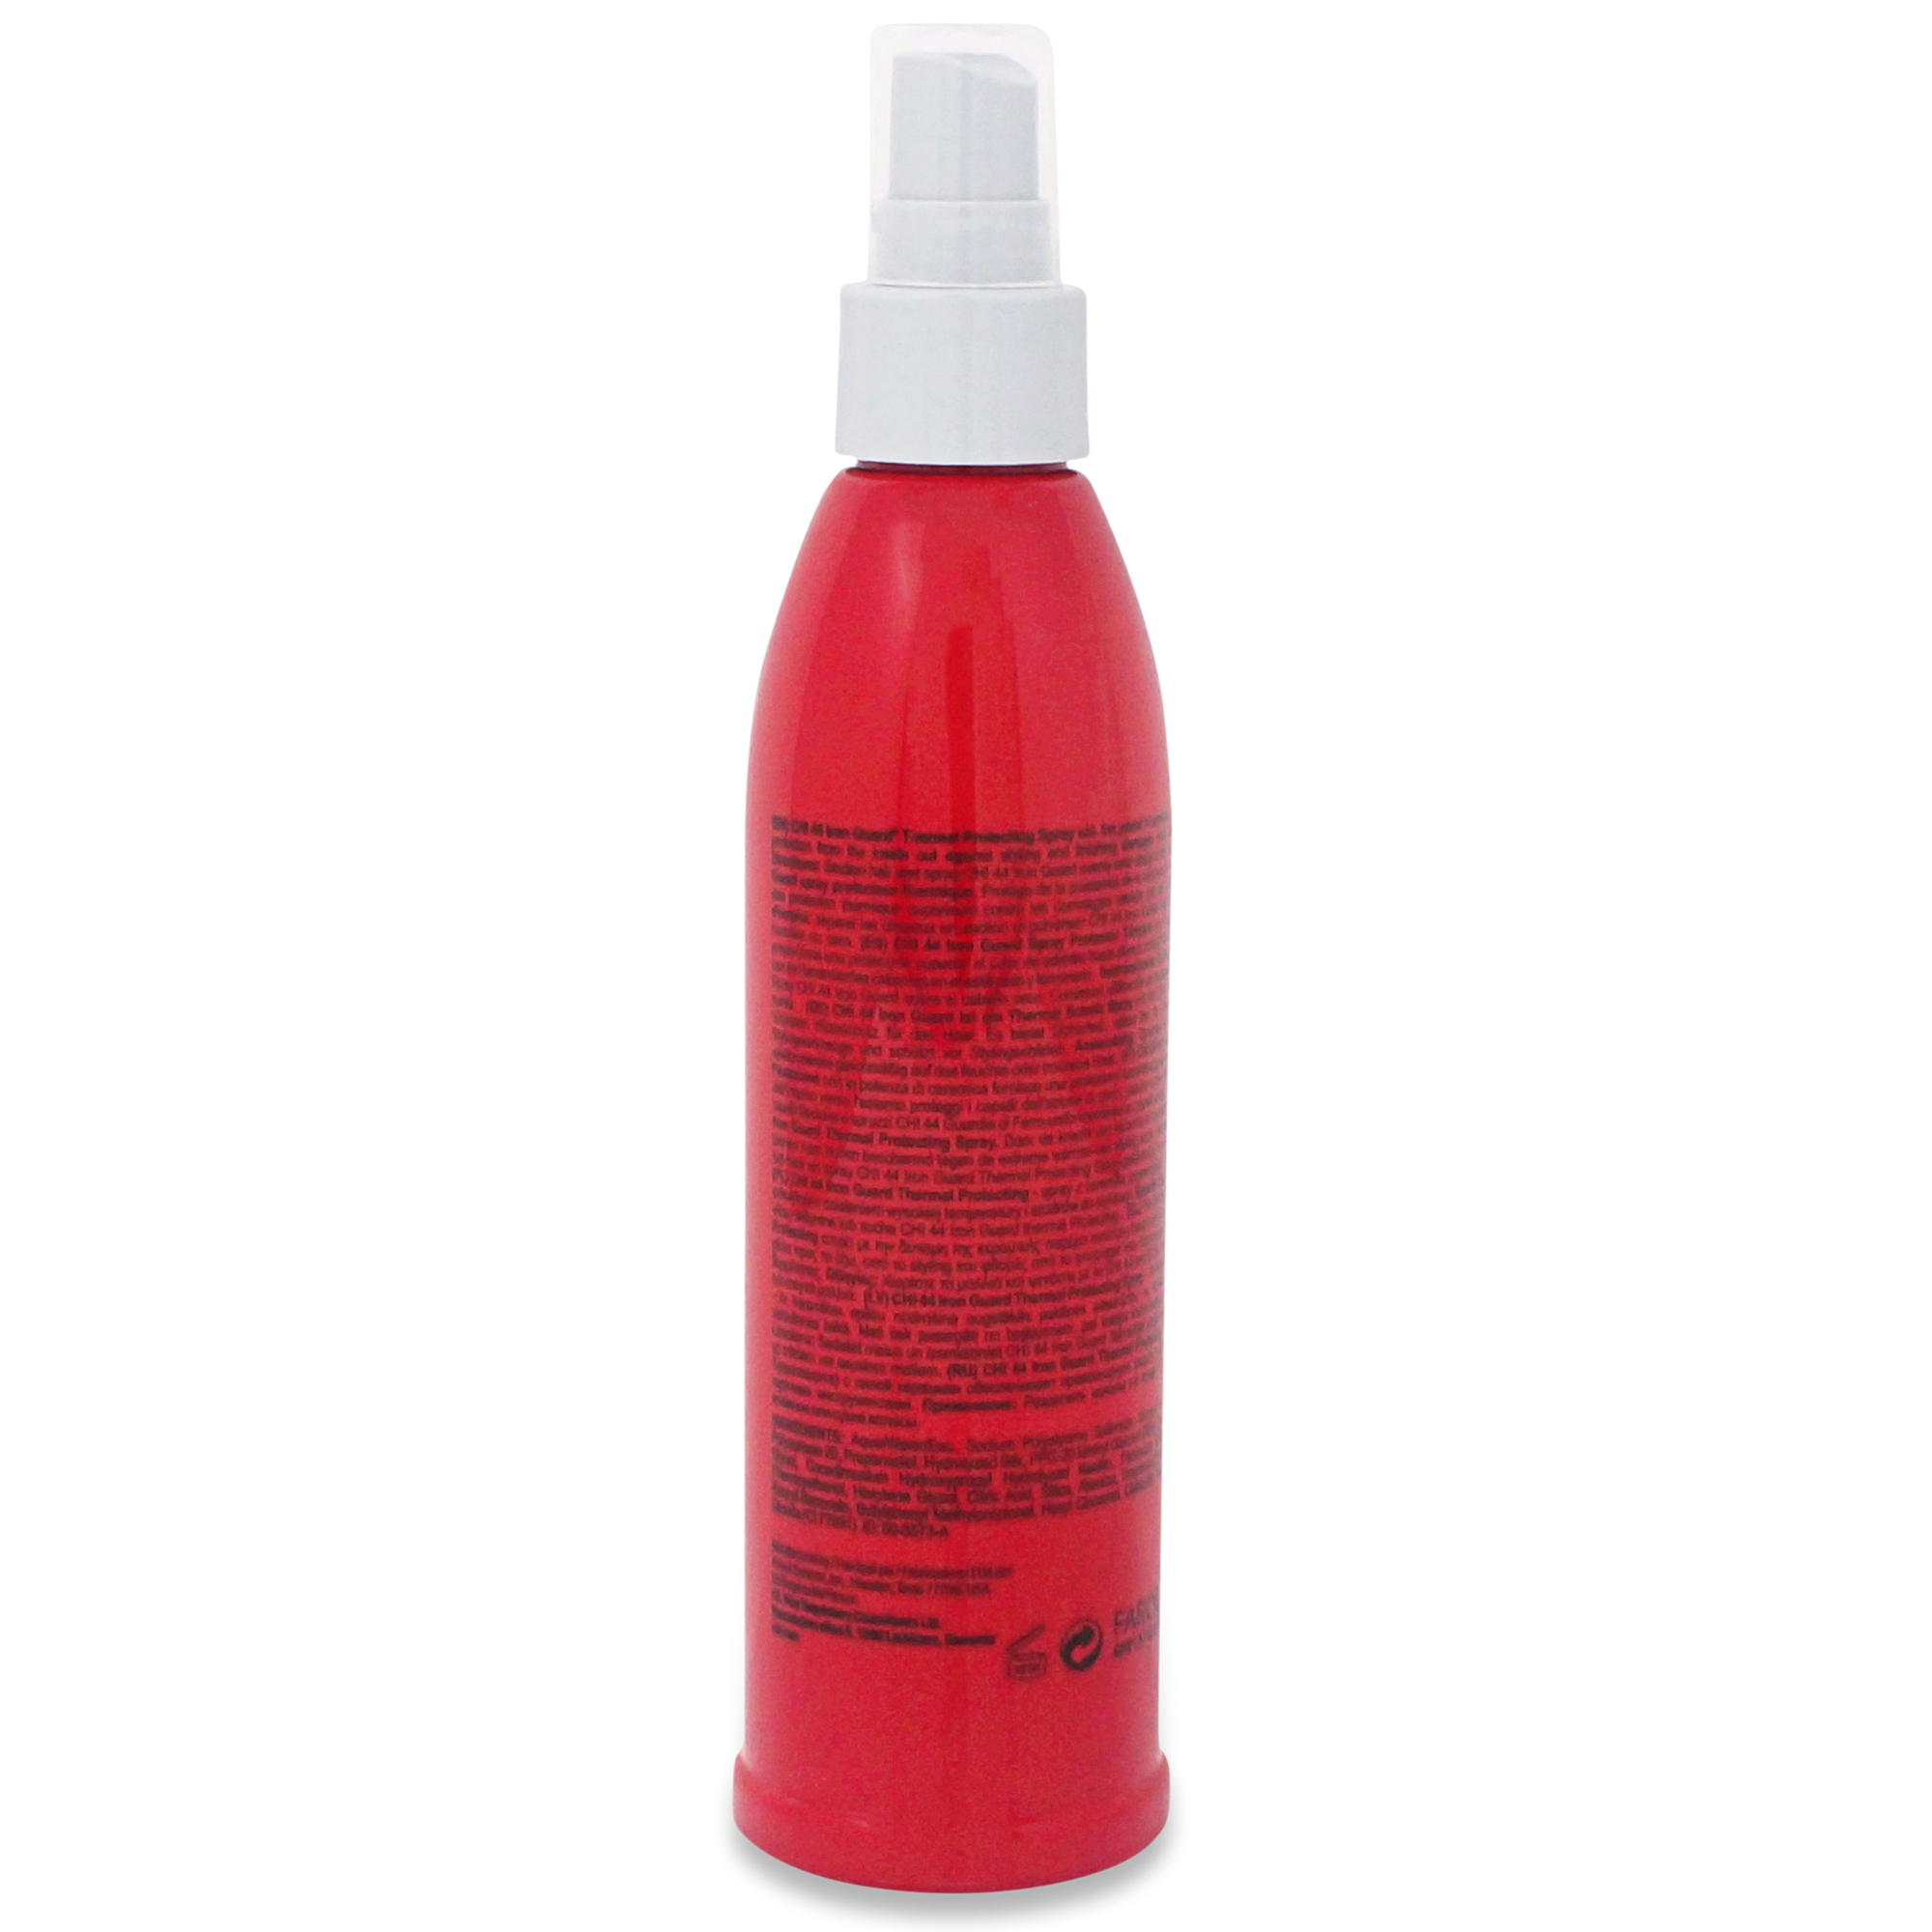 CHI 44 Iron Guard Thermal Protection Spray 8 oz - image 5 of 8